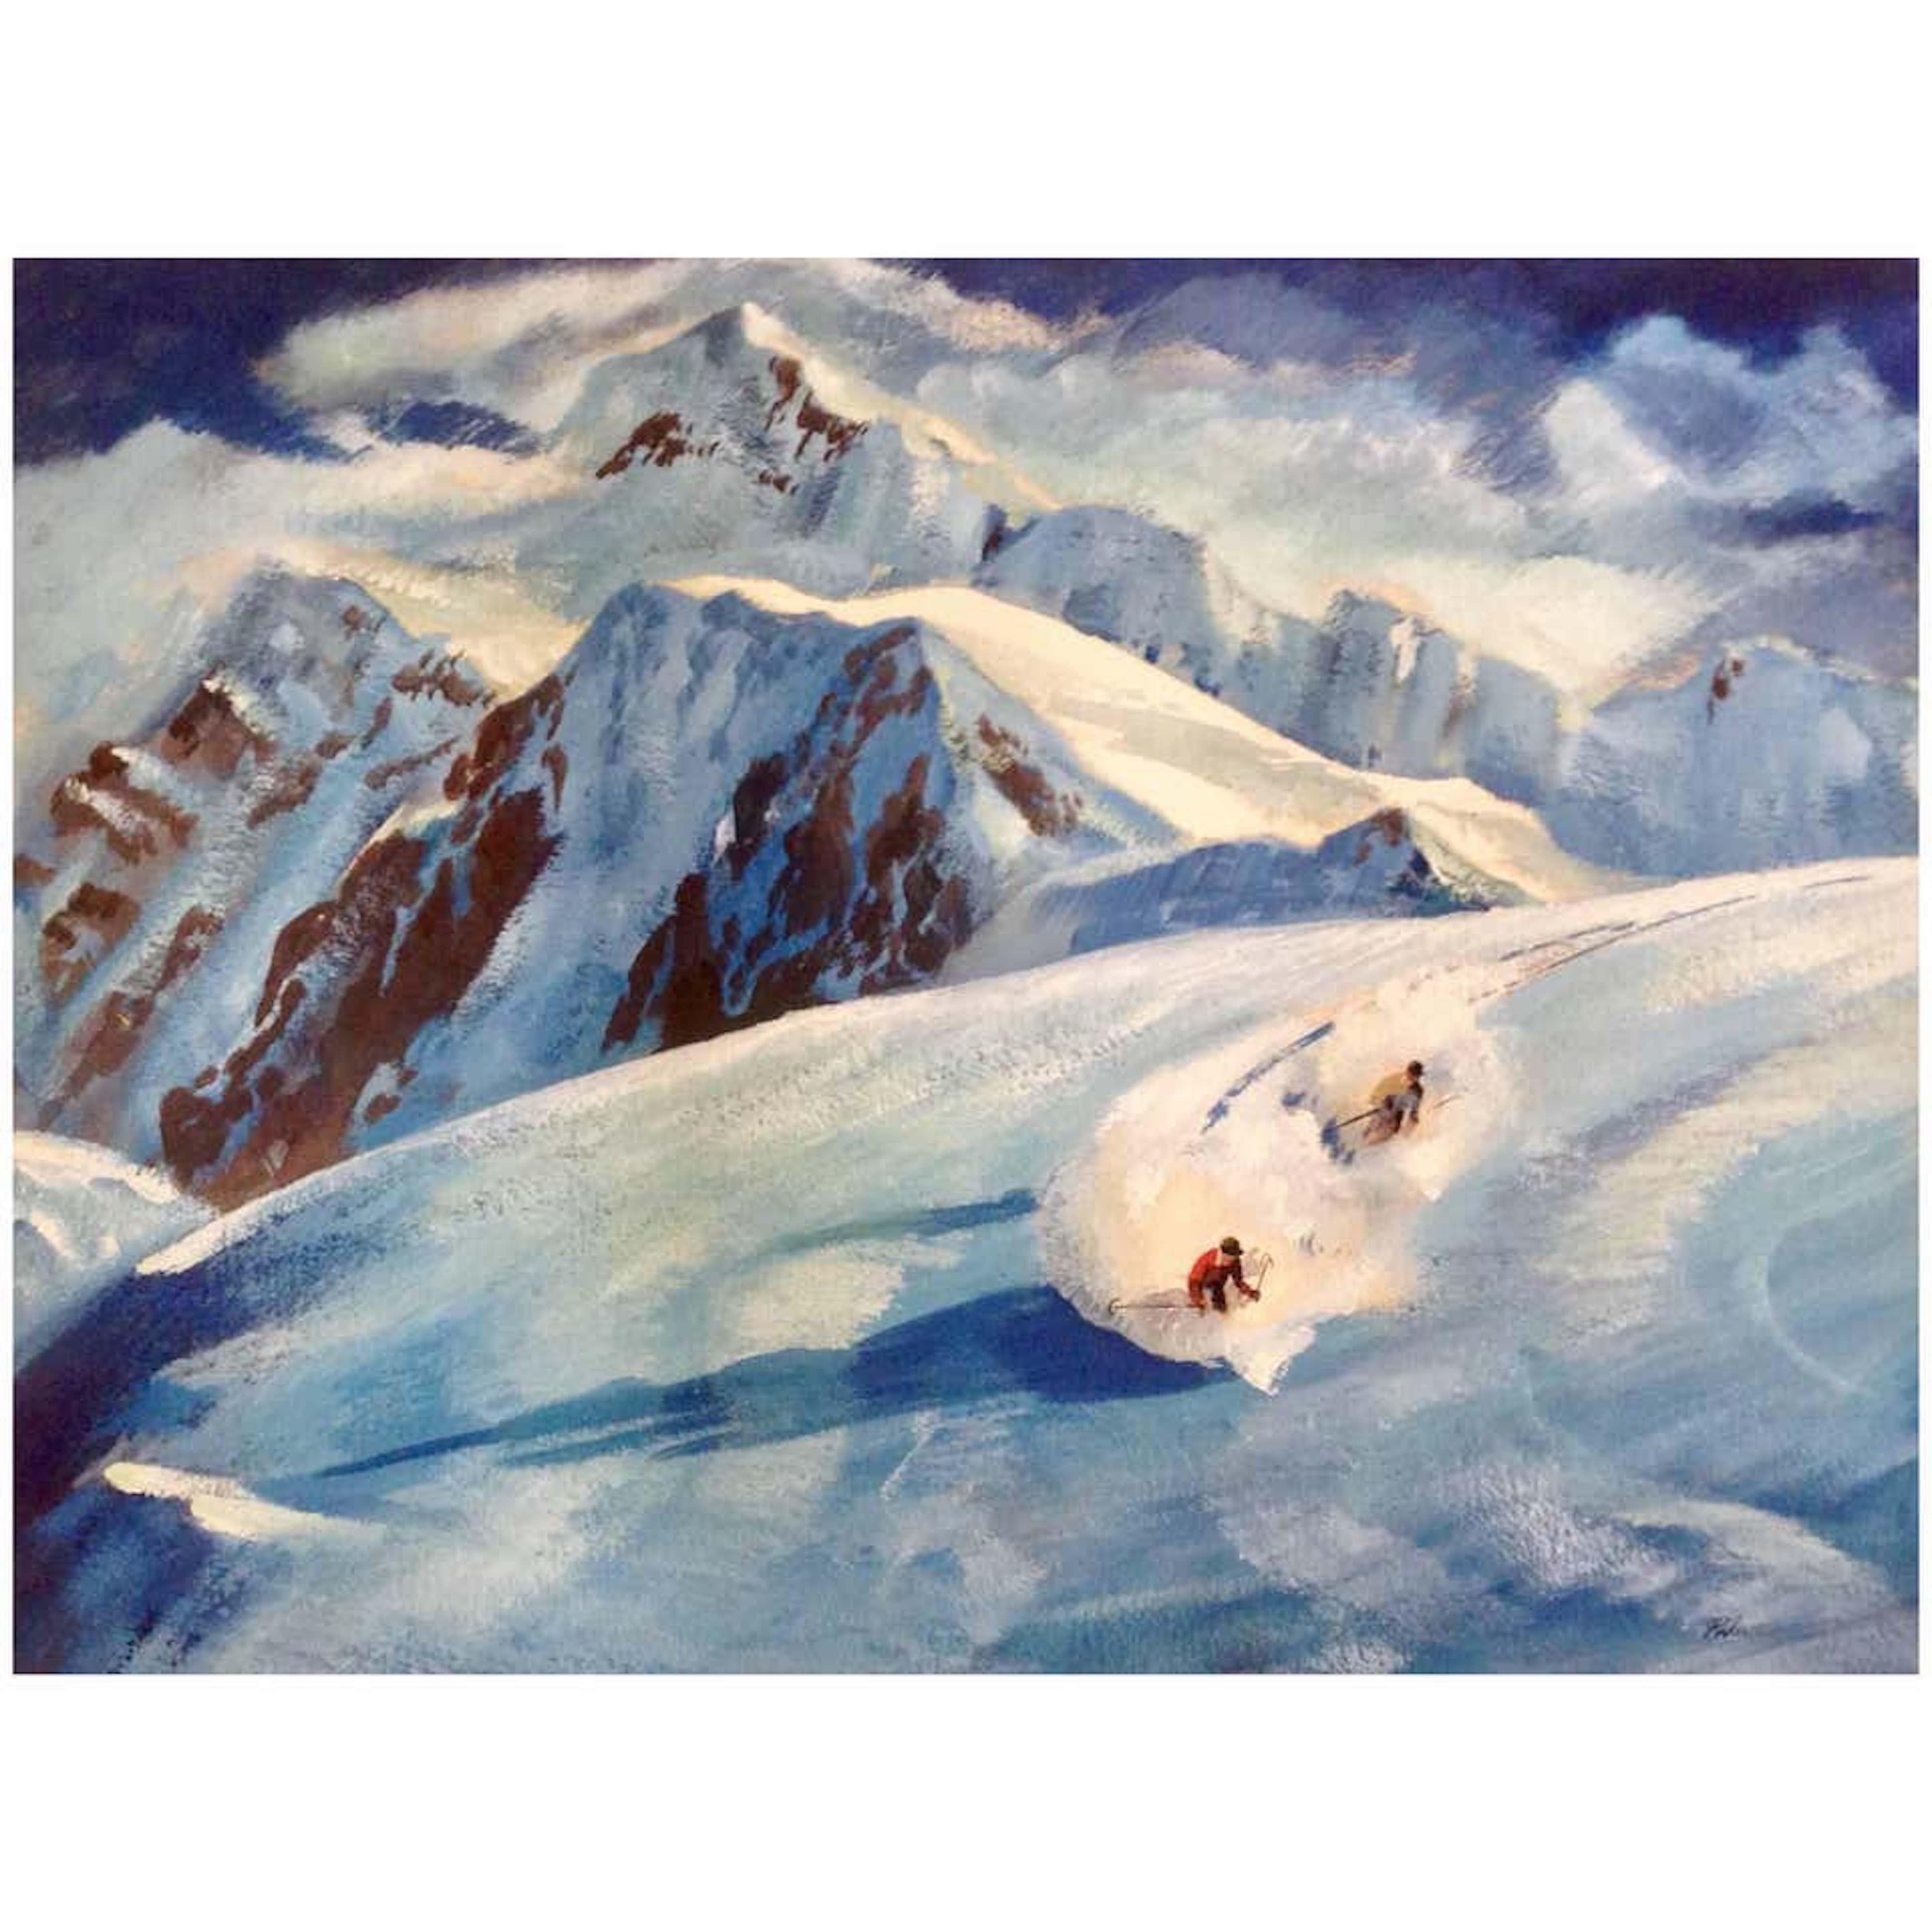 Mid-Century Modern Vintage 1940s Ski Painting Watercolor and Gouache